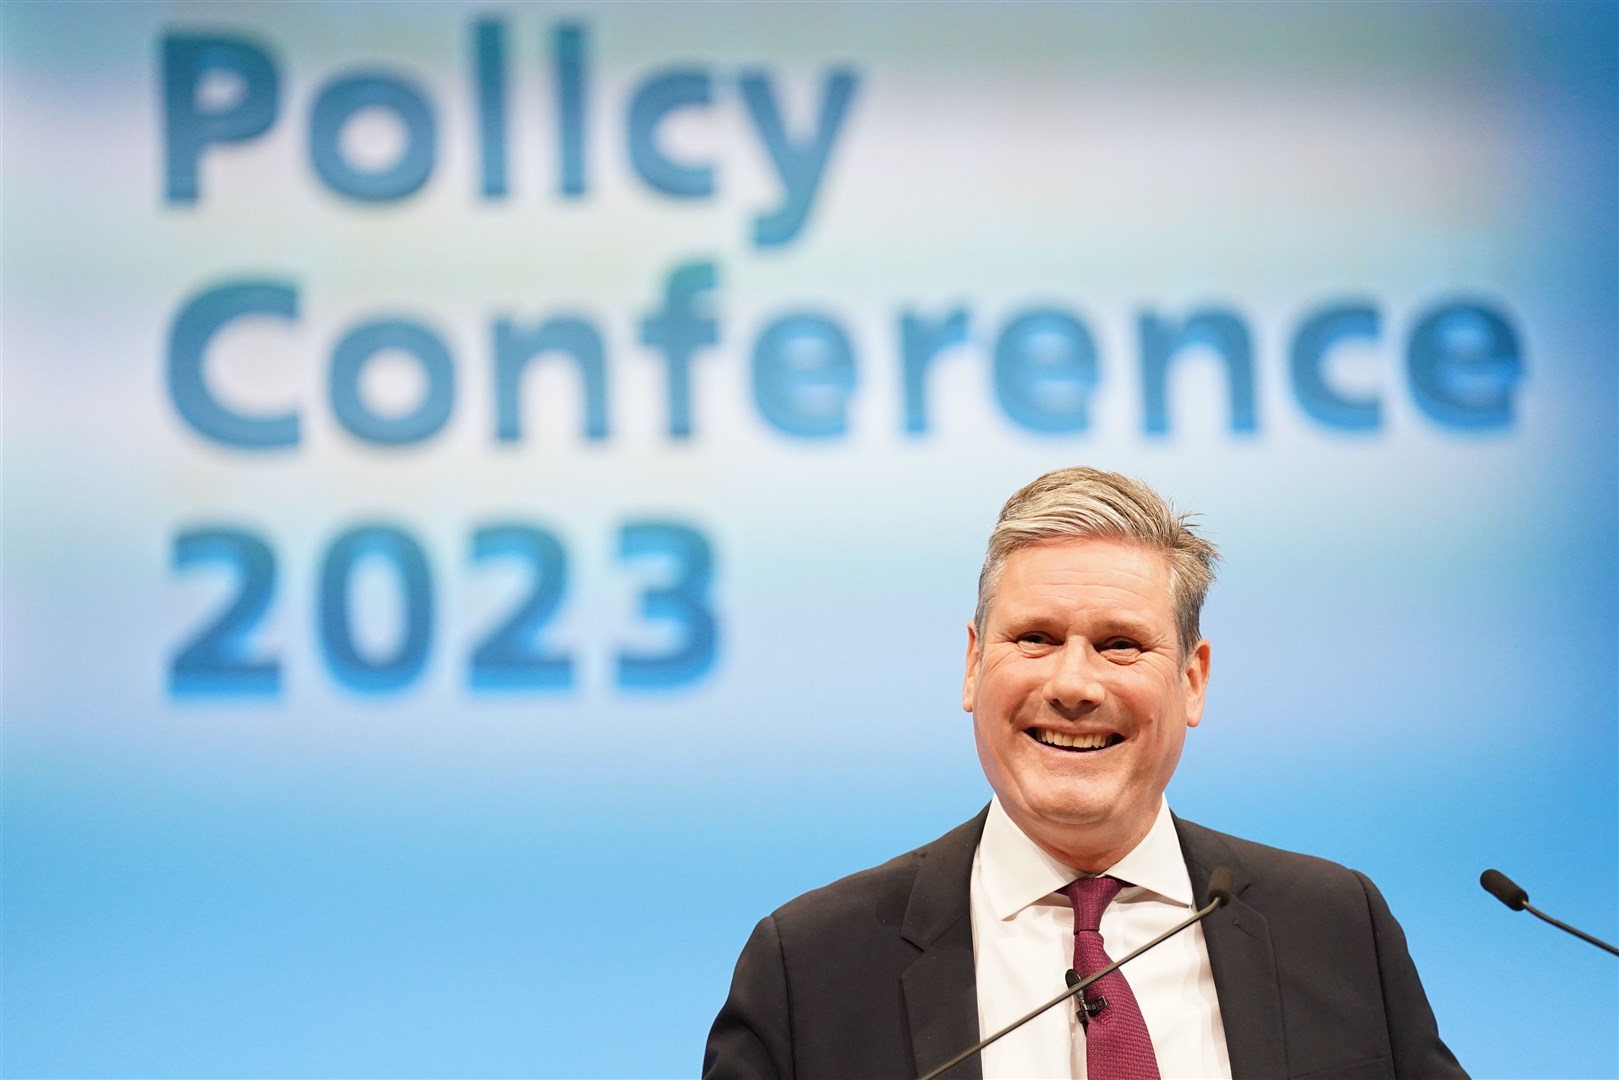 Labour leader Sir Keir Starmer addressed the Unite union’s policy conference in Brighton (Stefan Rousseau/PA)